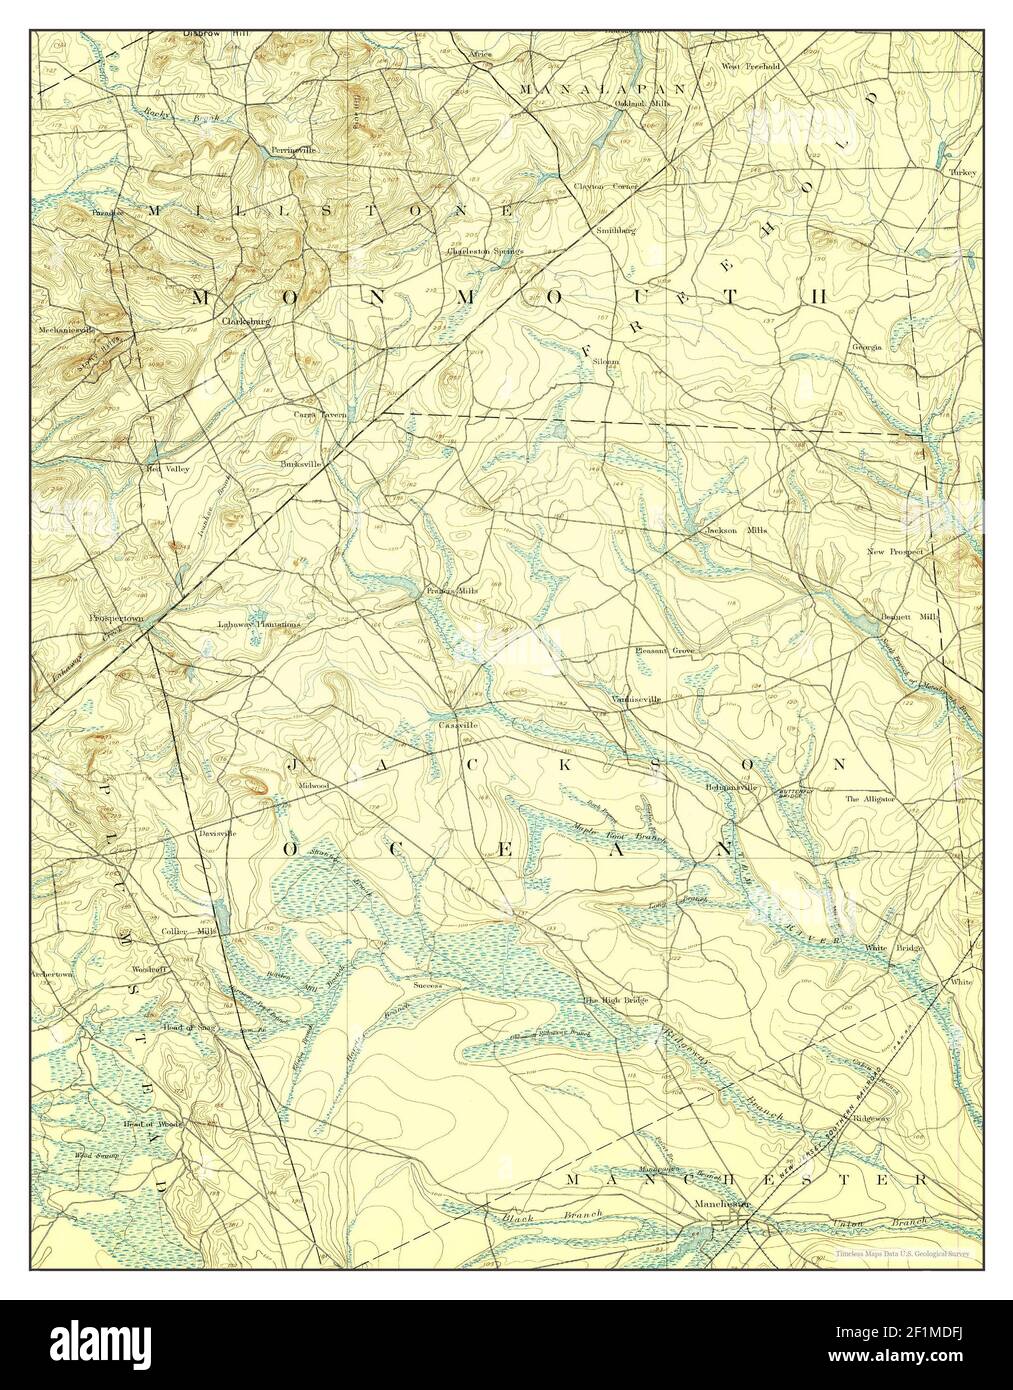 Cassville, New Jersey, map 1894, 1:62500, United States of America by Timeless Maps, data U.S. Geological Survey Stock Photo